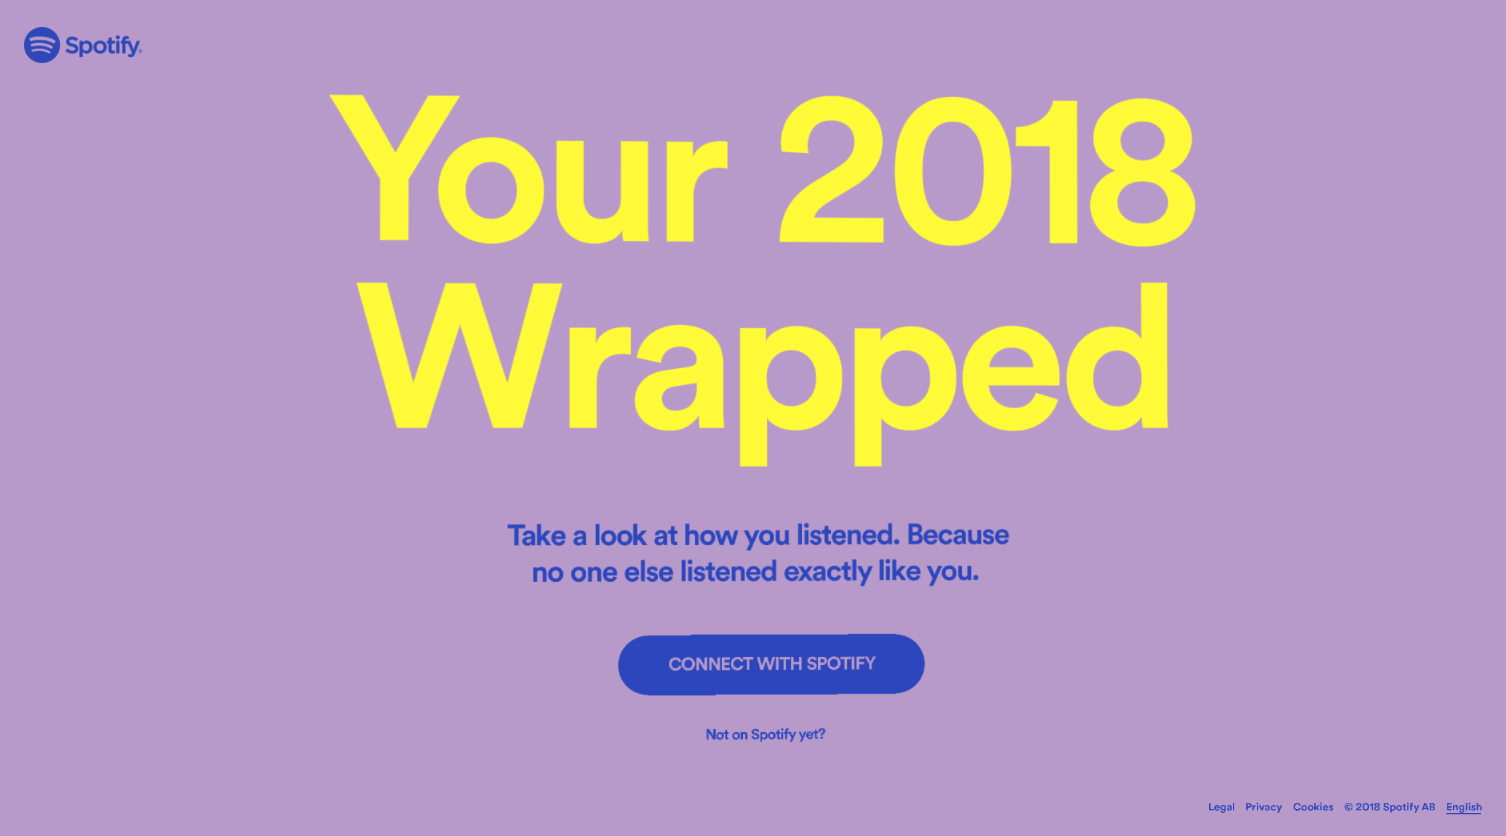 Spotify Wrapped microsite